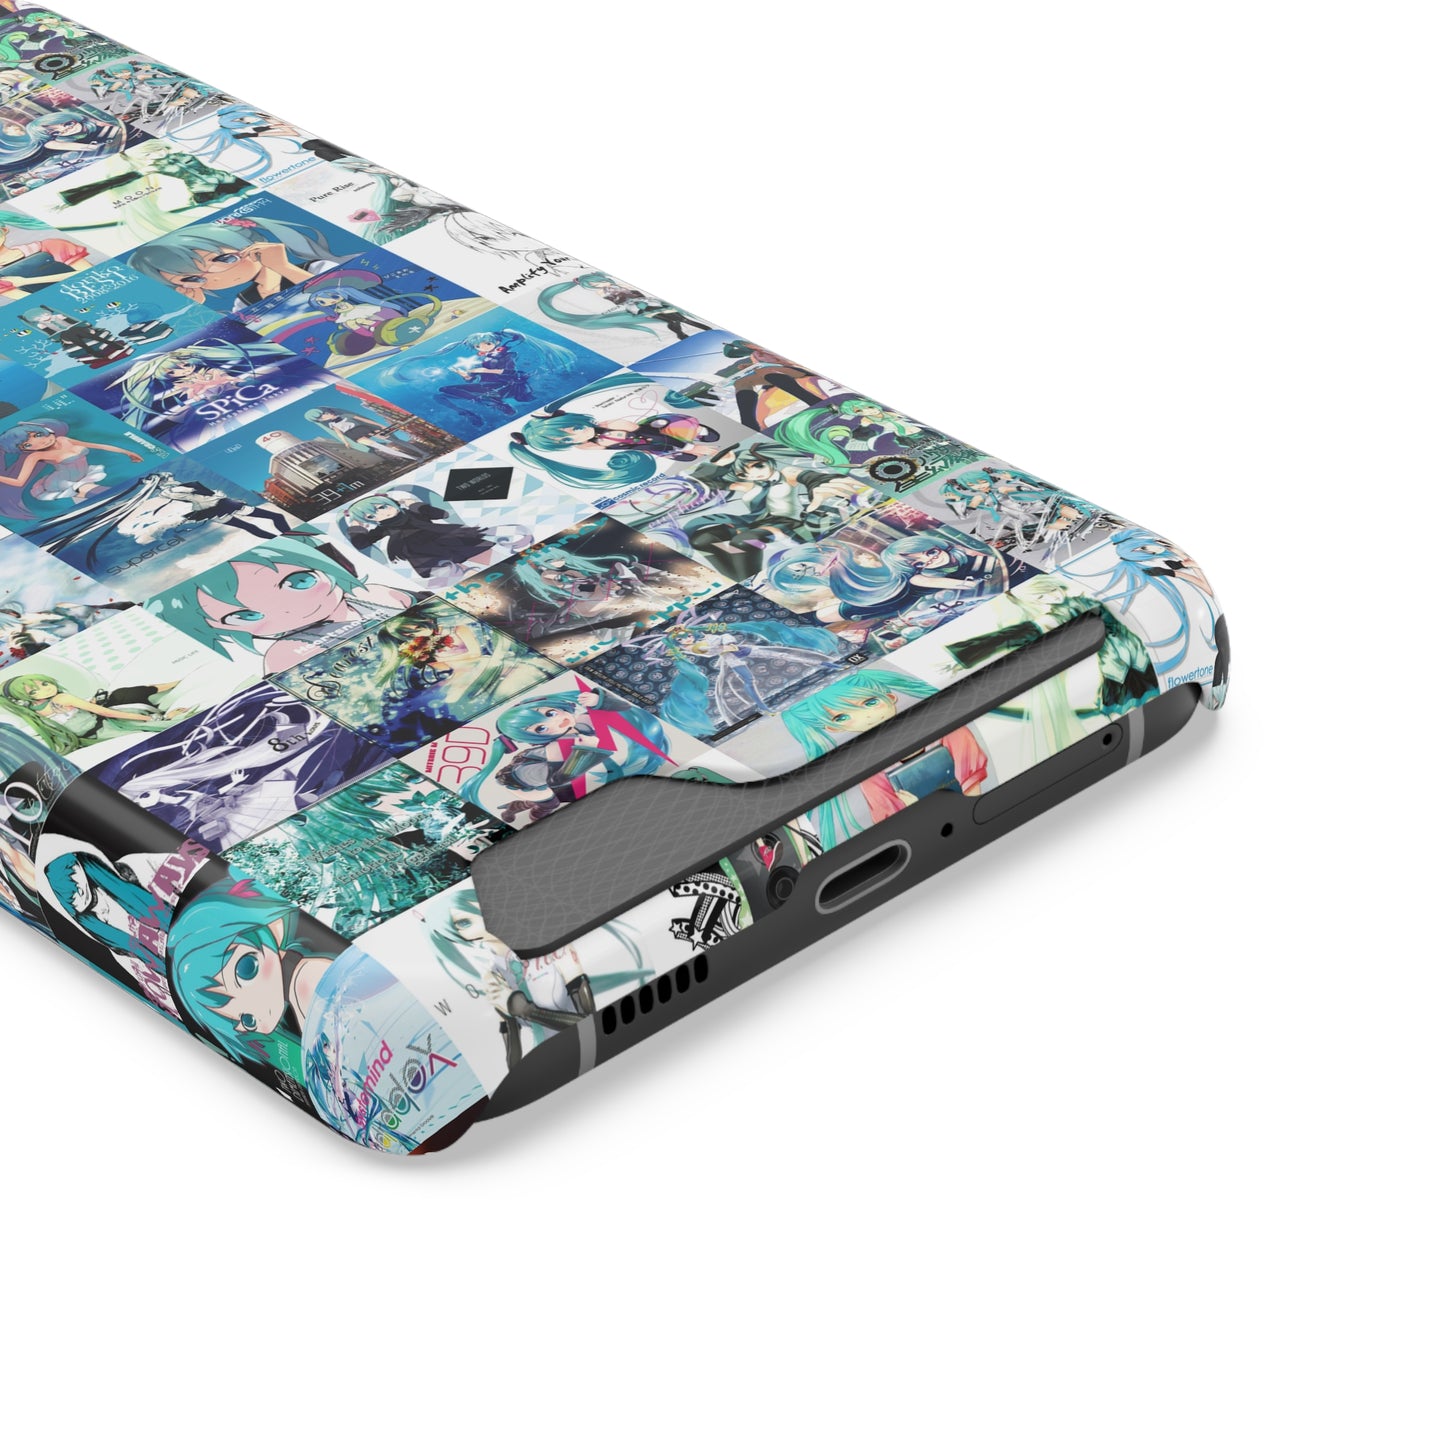 Hatsune Miku Album Cover Collage Phone Case With Card Holder